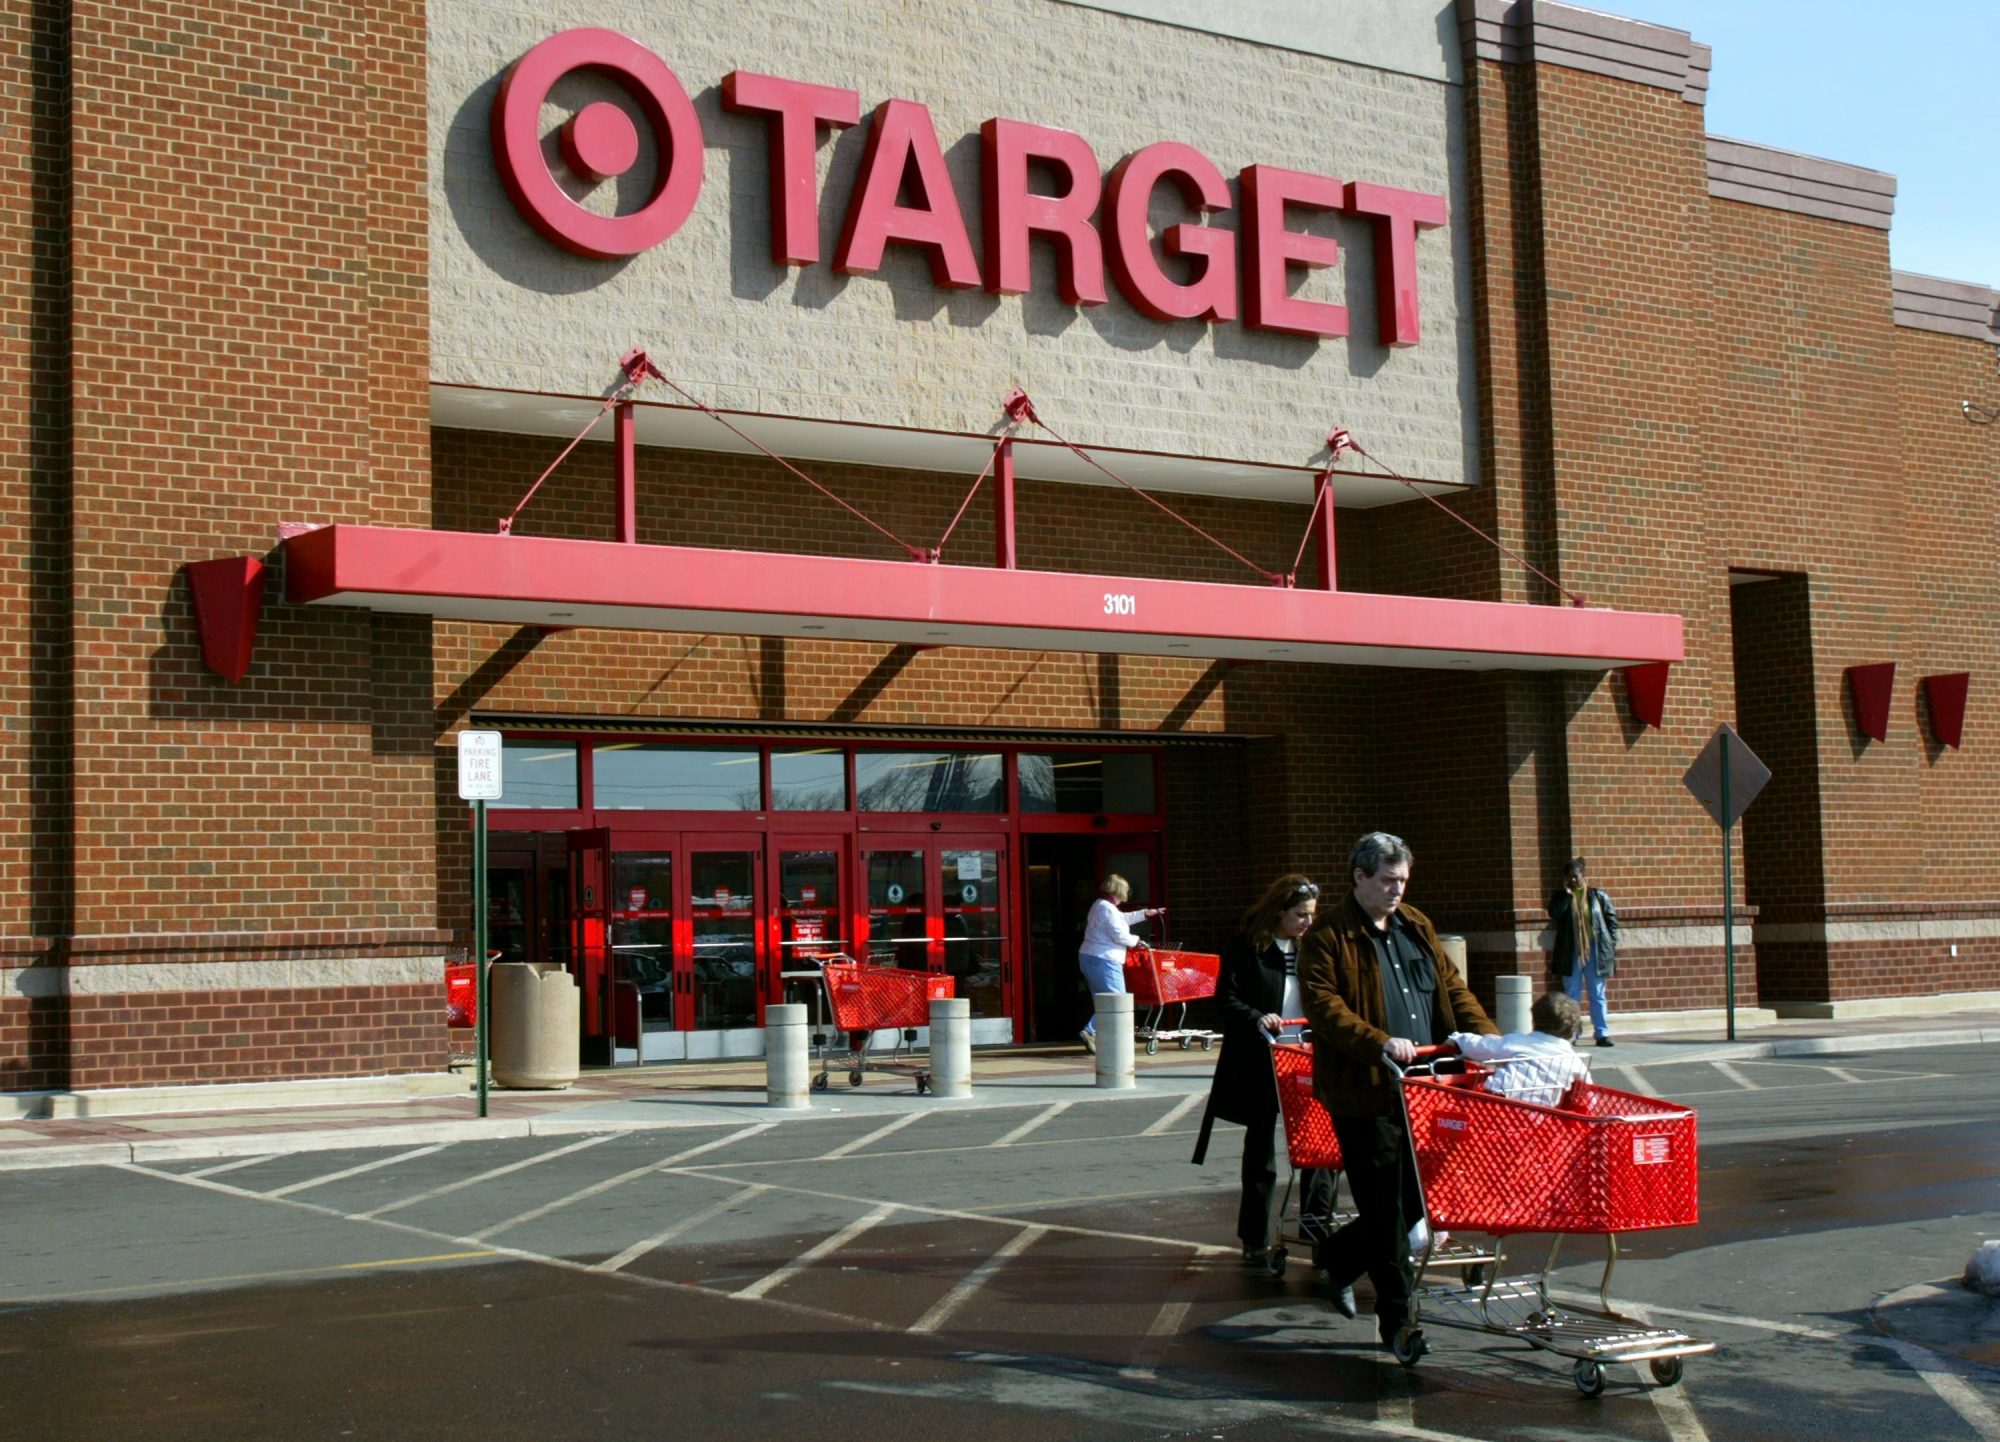 getty-target-store-image